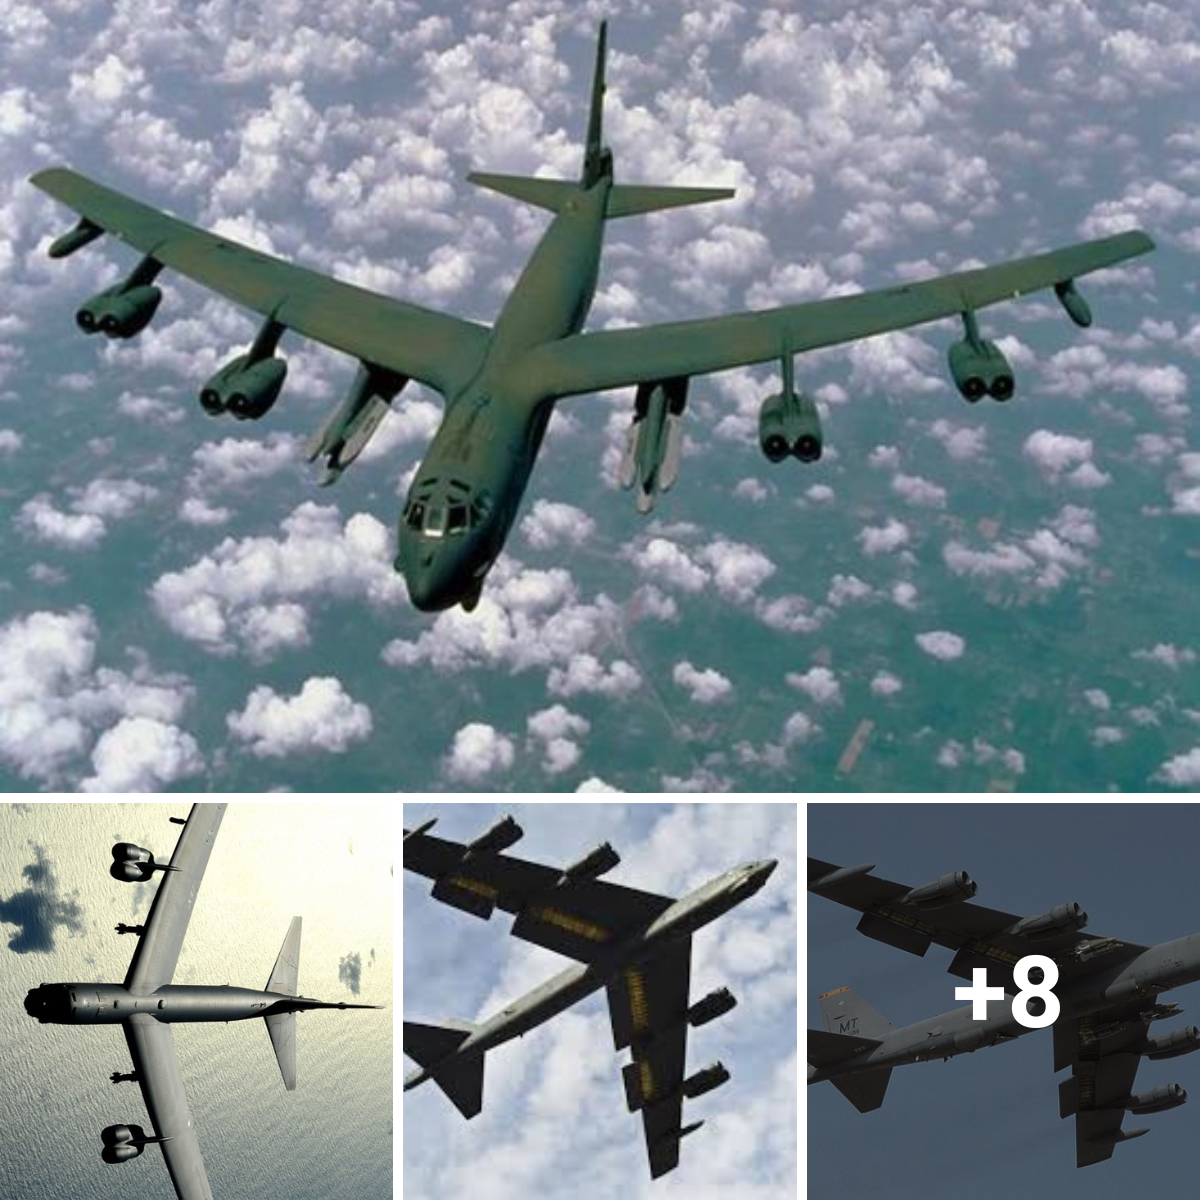 Why will this “old” B-52 bomber outlive everything?